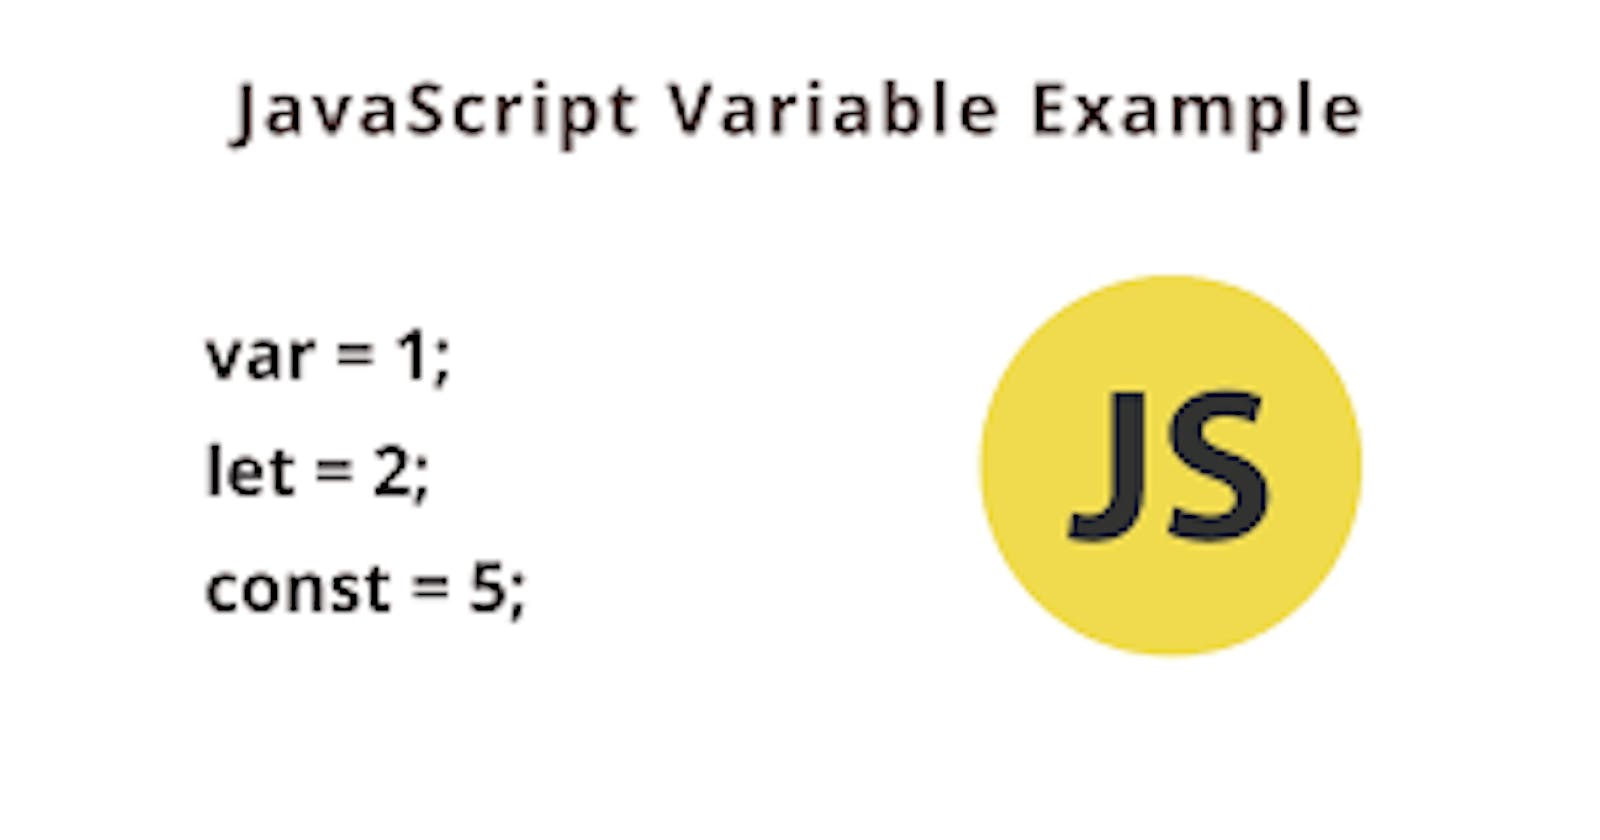 Variables in JS